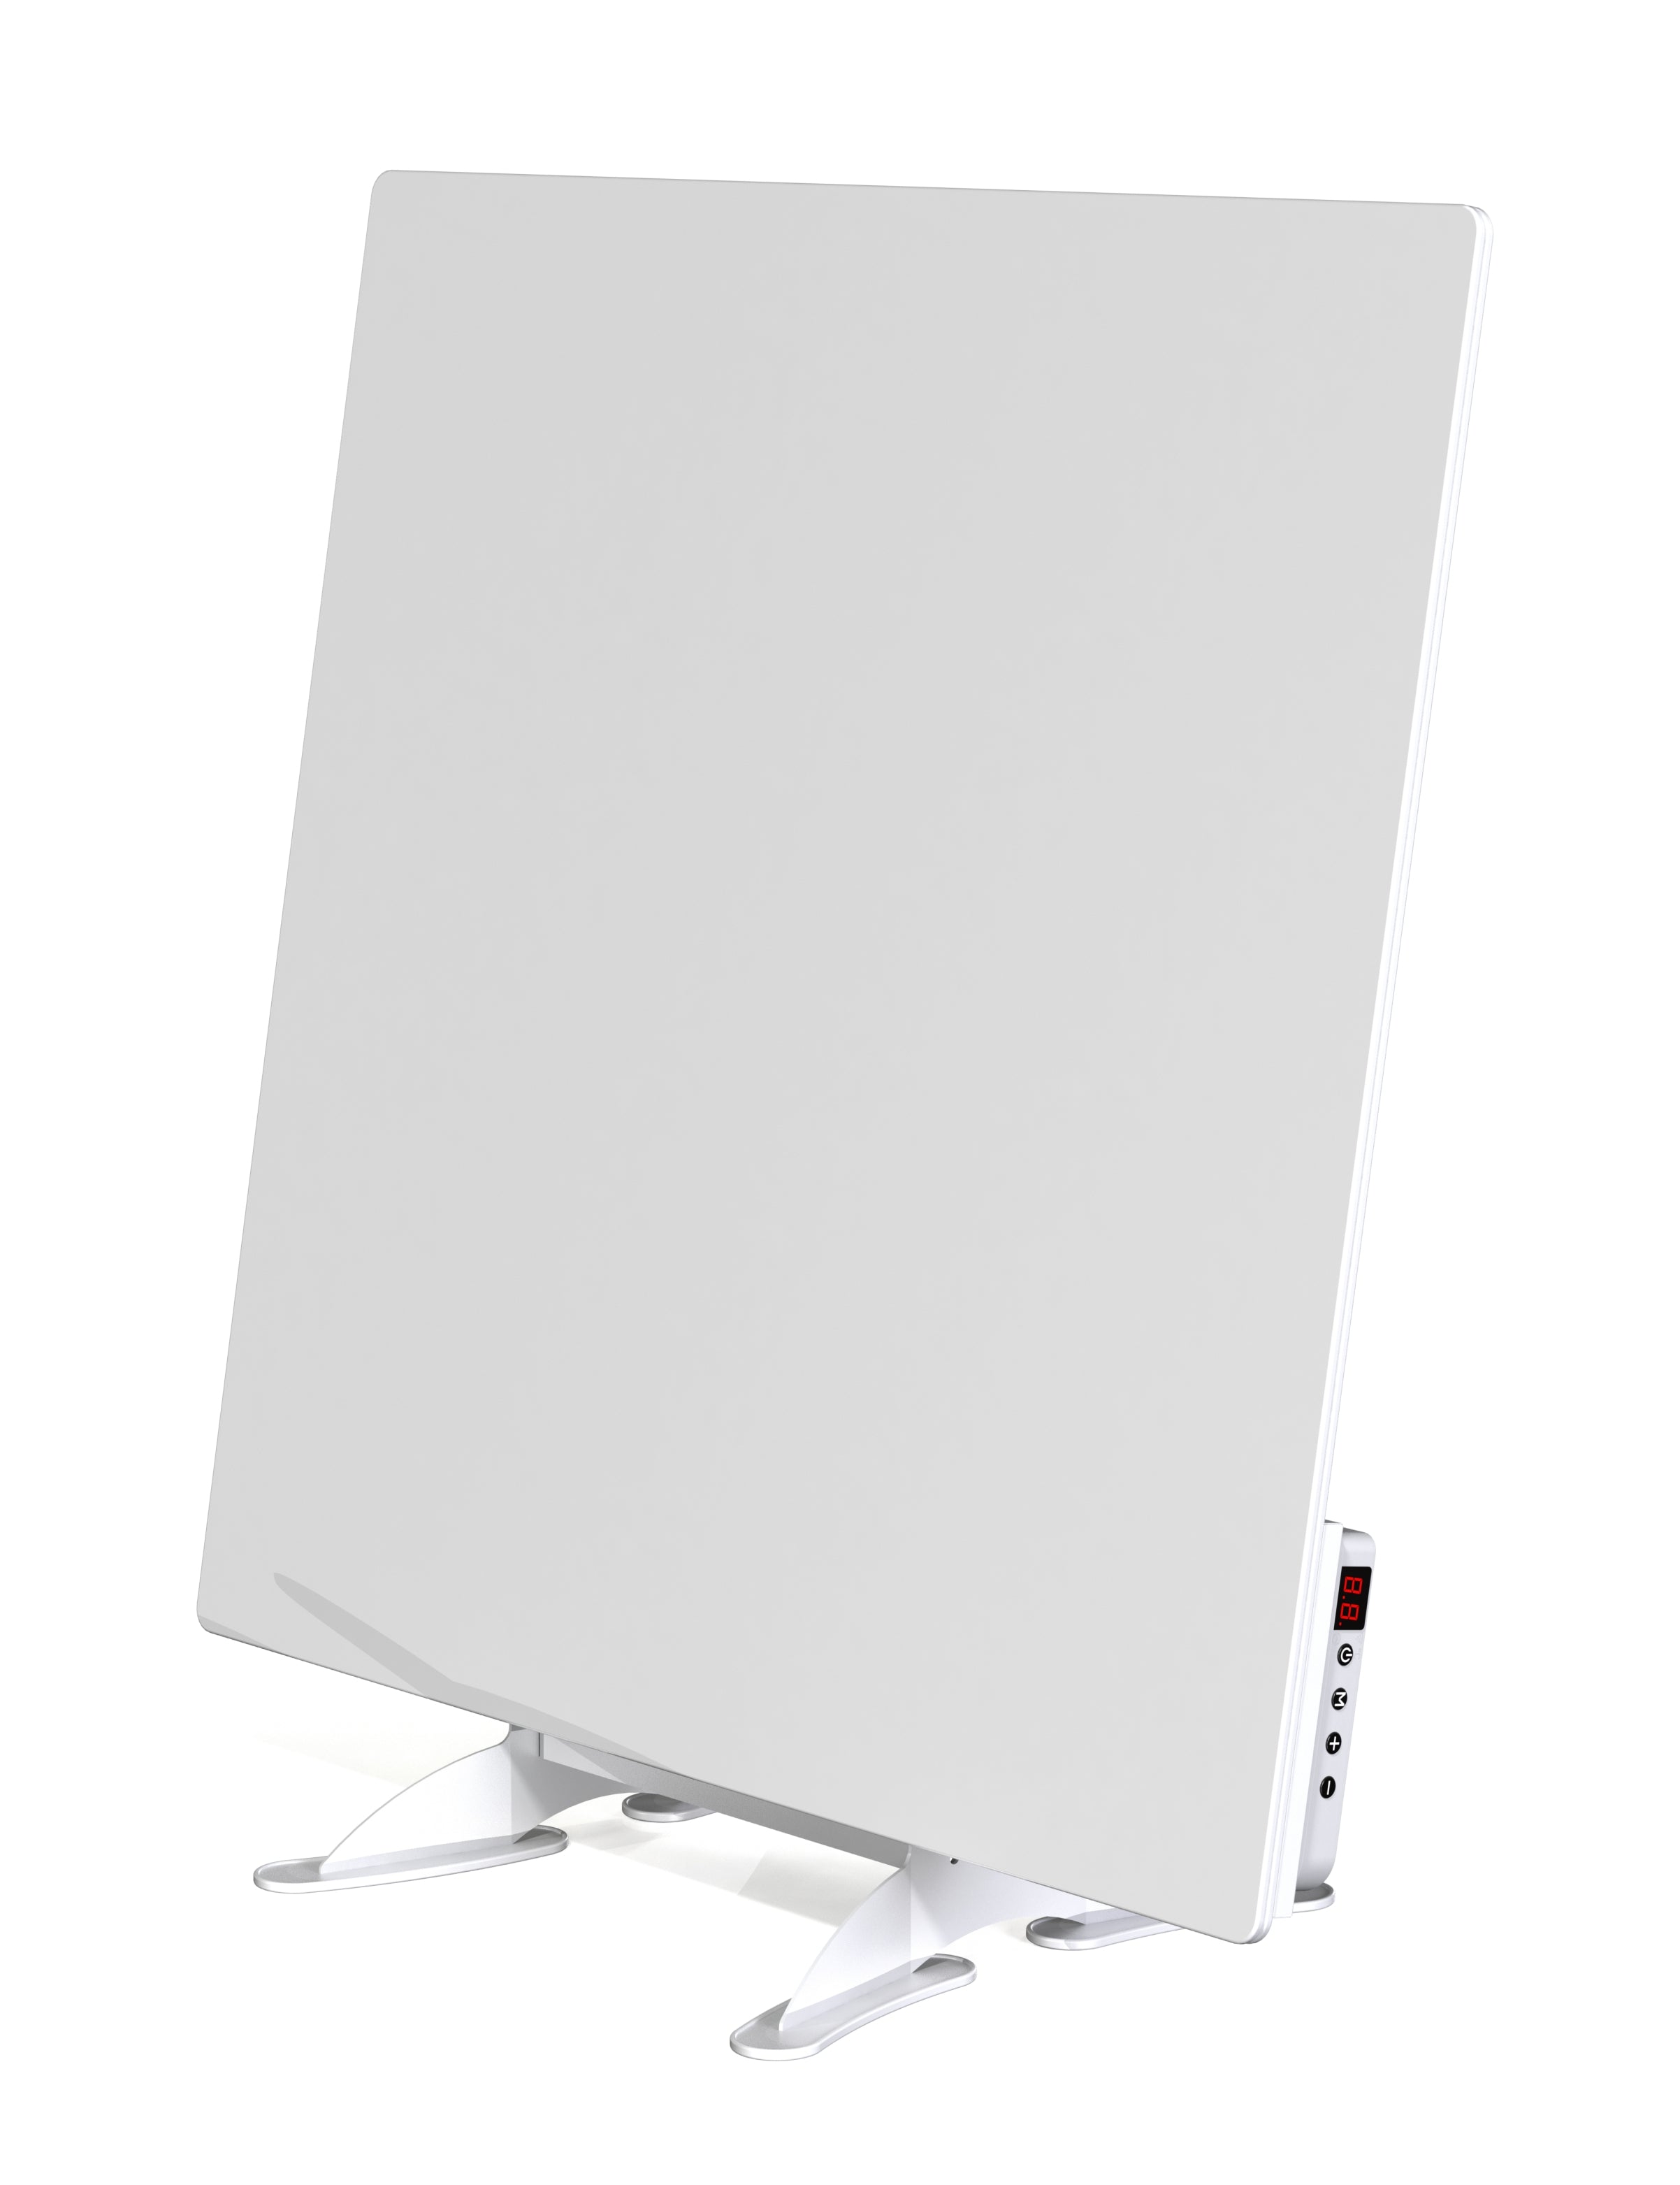 Far Infrared Heater - "Lavender Range" Smart WiFi control or ON/OFF models. Glass Smart infrared heating panels. White. 800-400Watts